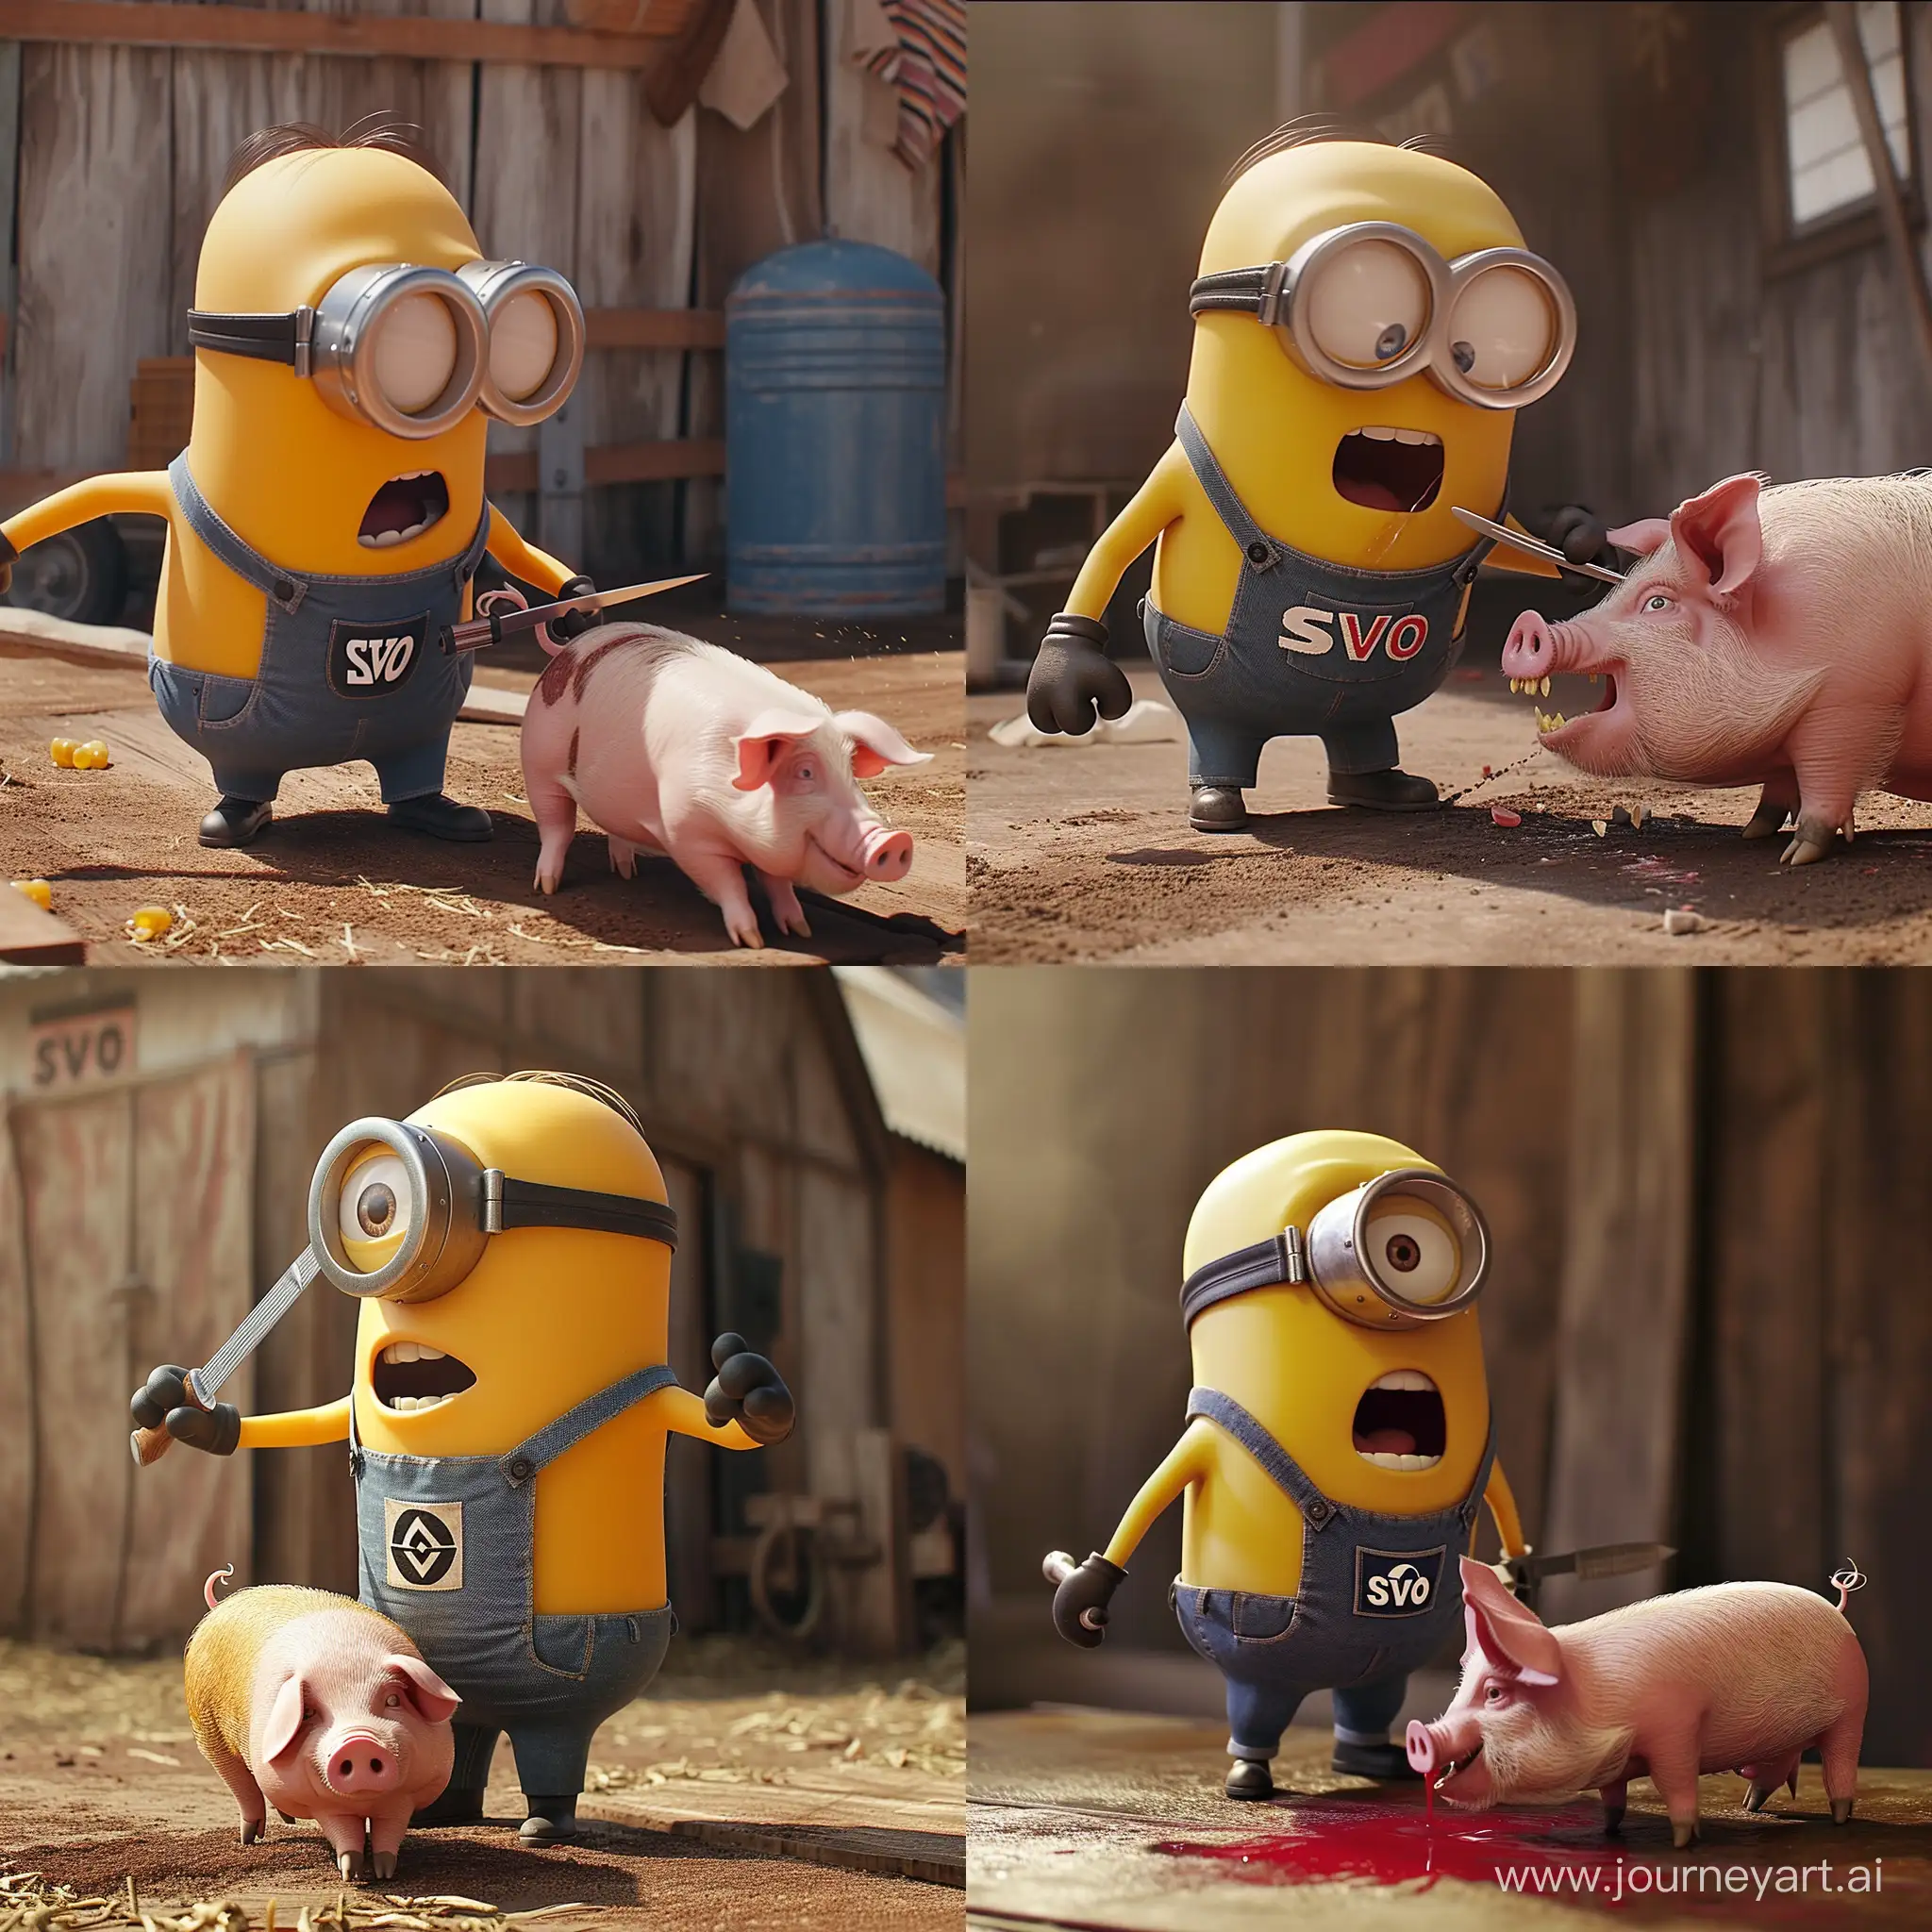 Energetic-Minion-in-SVO-TShirt-Carving-a-Pig